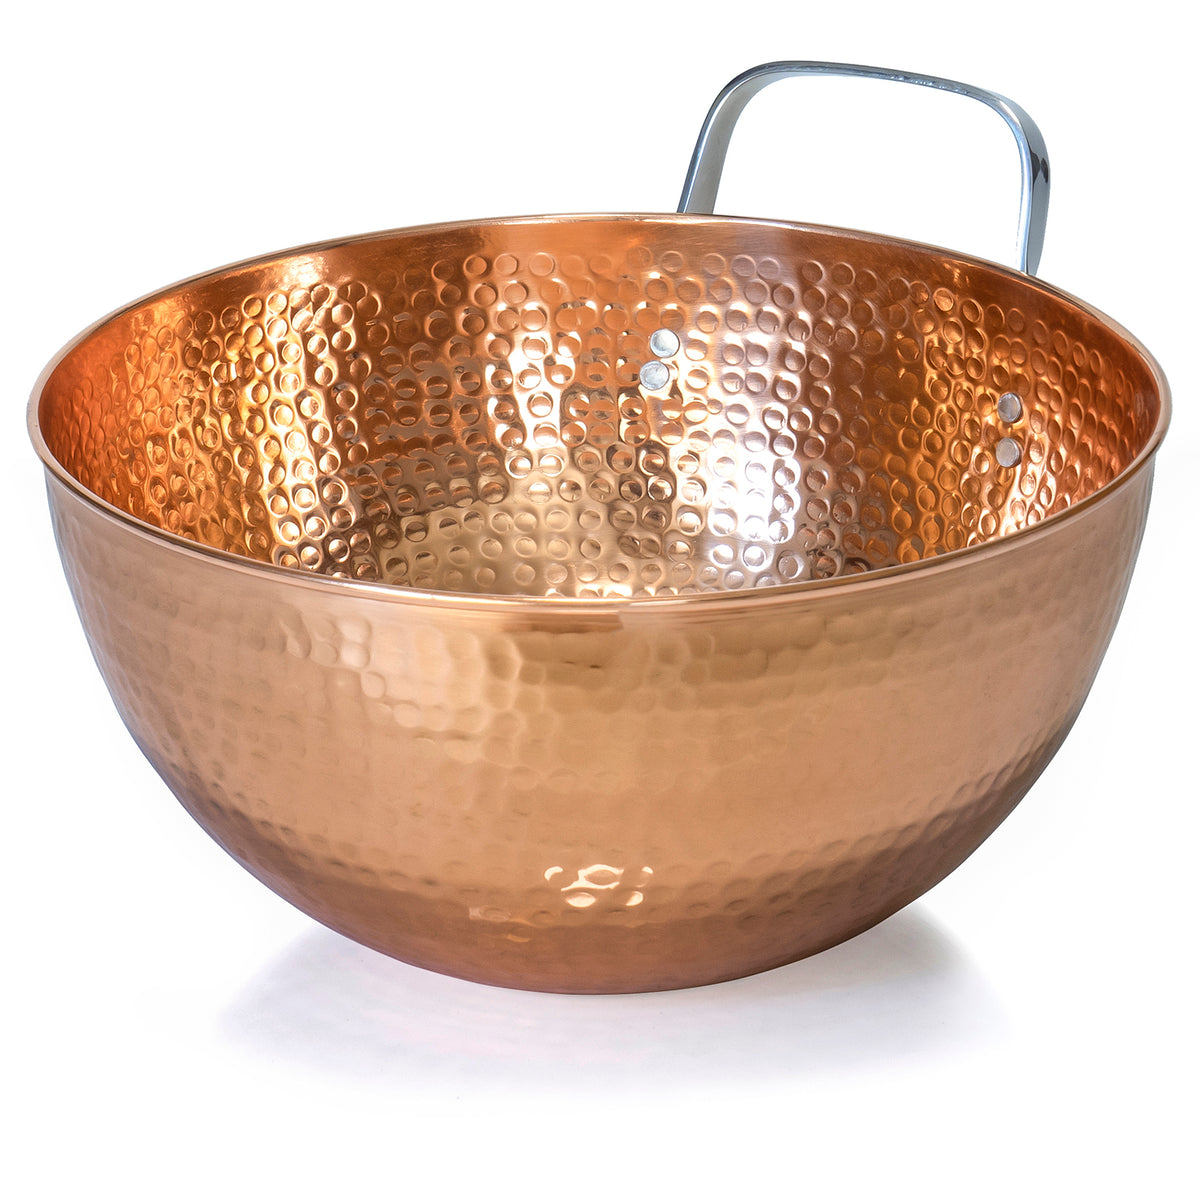 12-1/8 Vintage Copper Mixing Bowl with Rolled Rim and Handle. 2lb